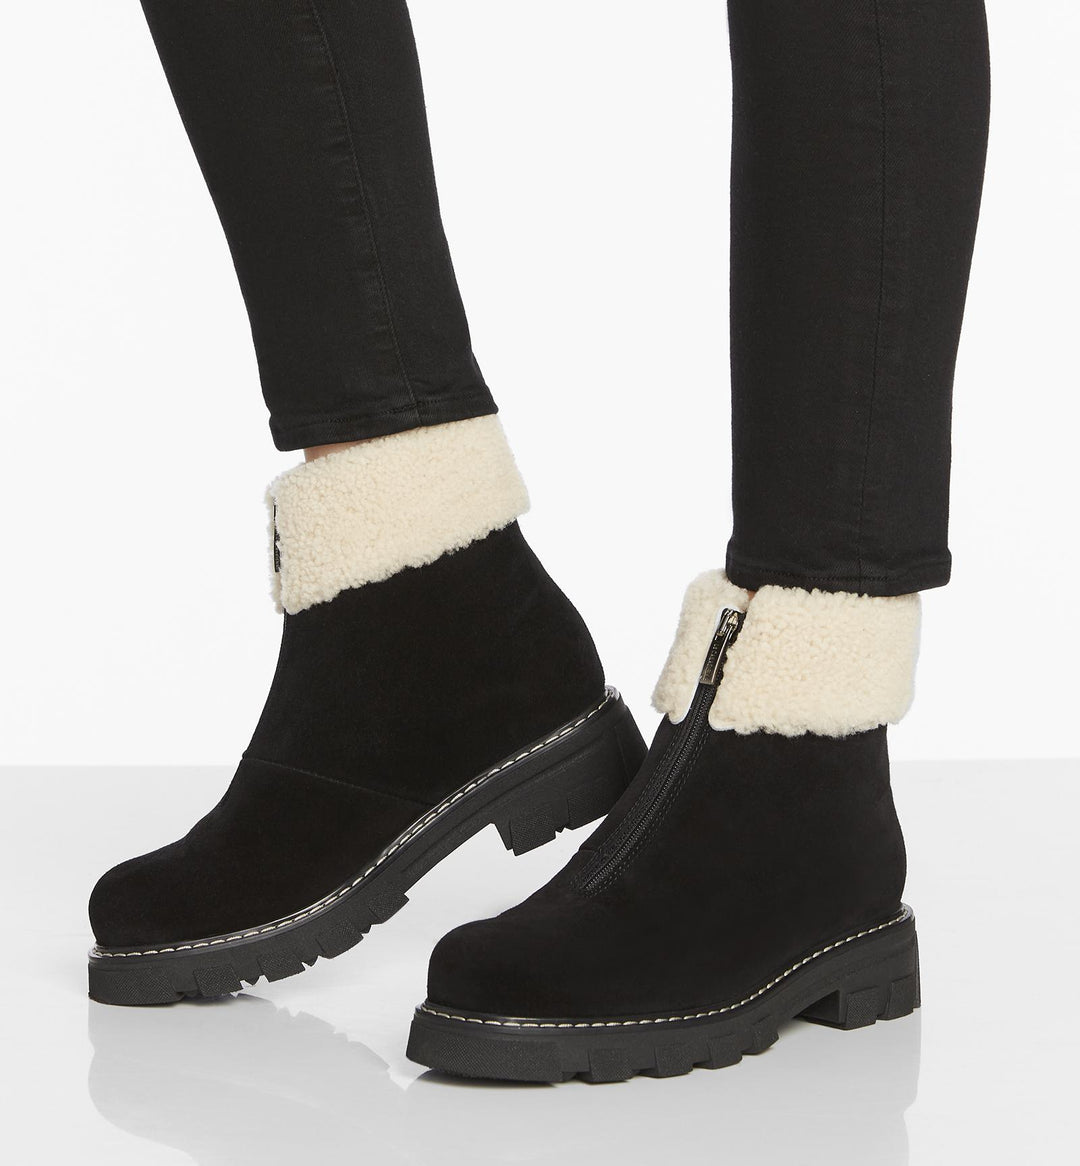 ABBA SHEARLING SUEDE BOOT - LA CANADIENNE